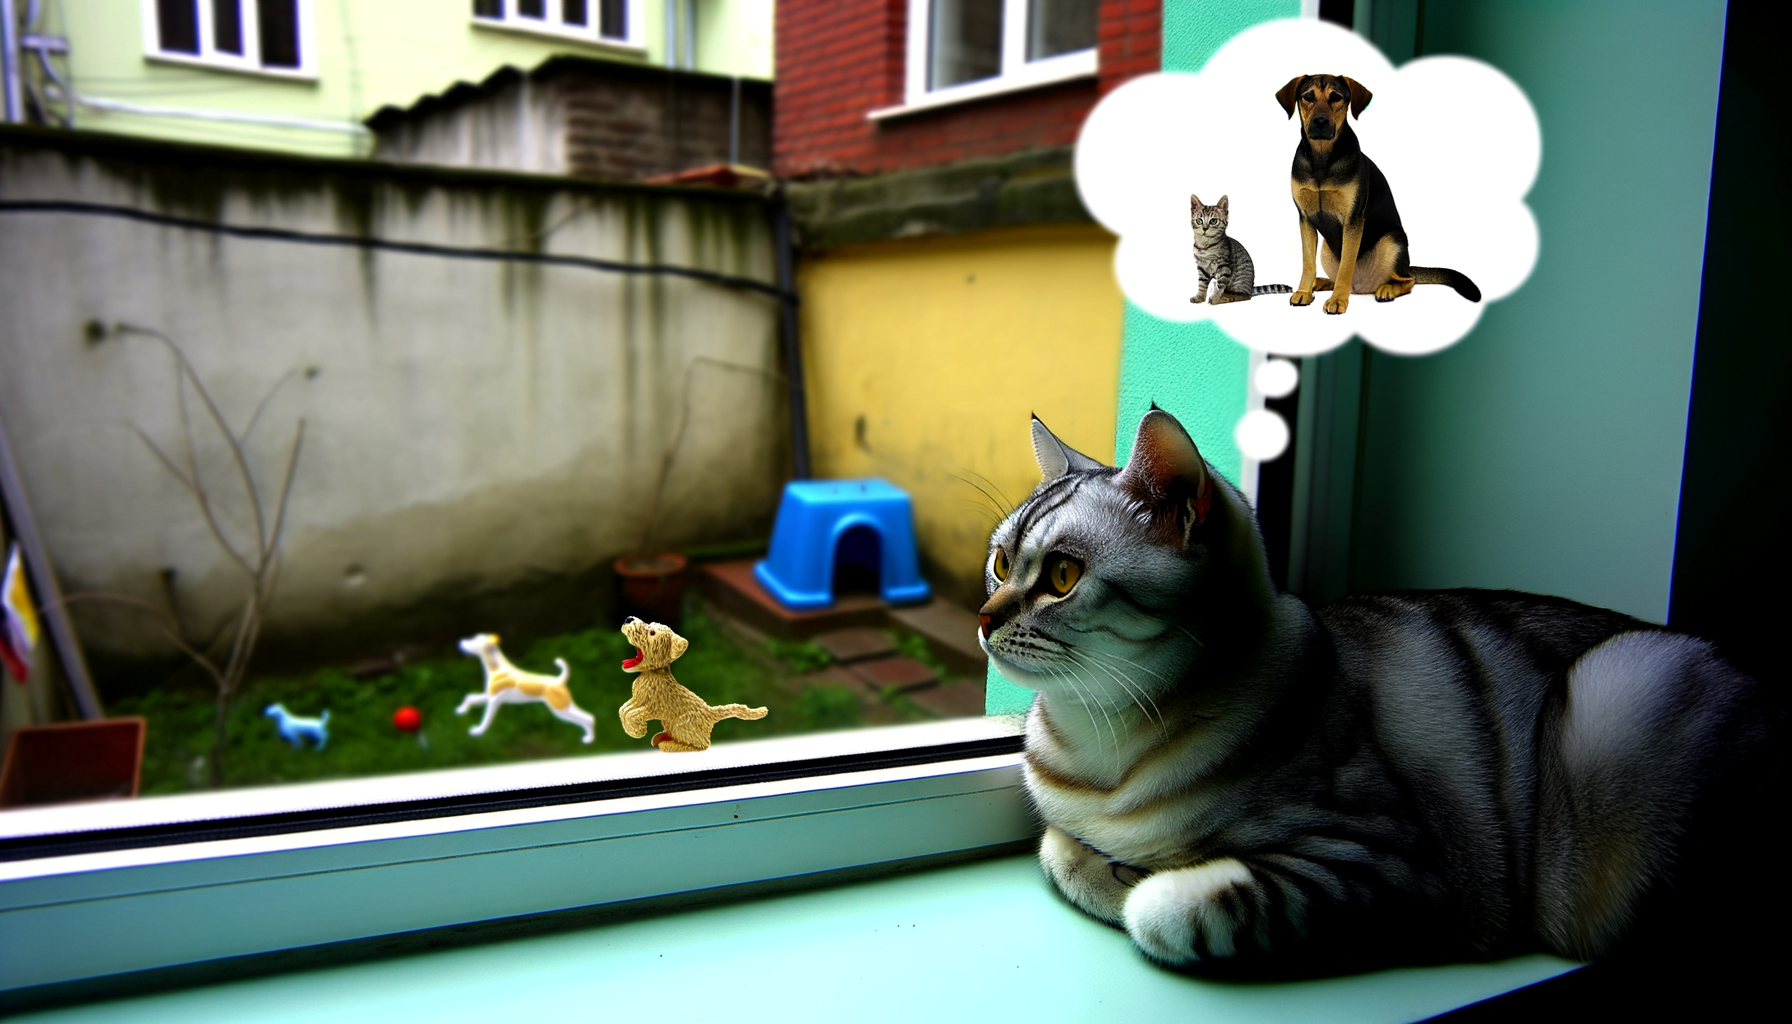 "Decoding Feline Psychology: Do Cats Perceive Dogs as Their Kind?"